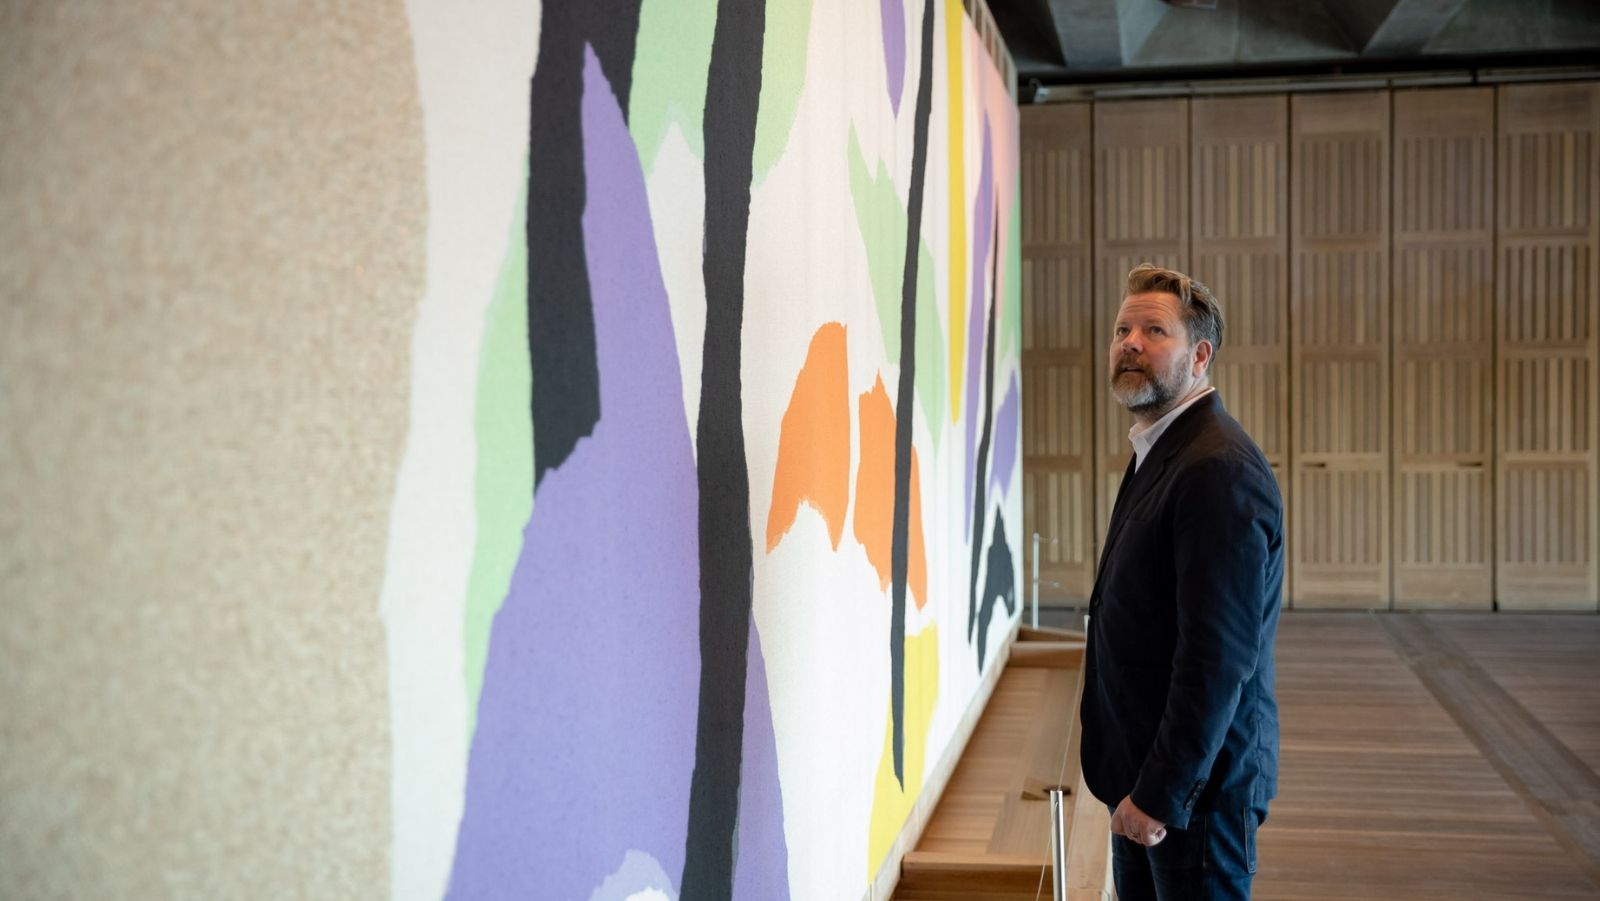 A man in a suit staring at artwork on a wall.